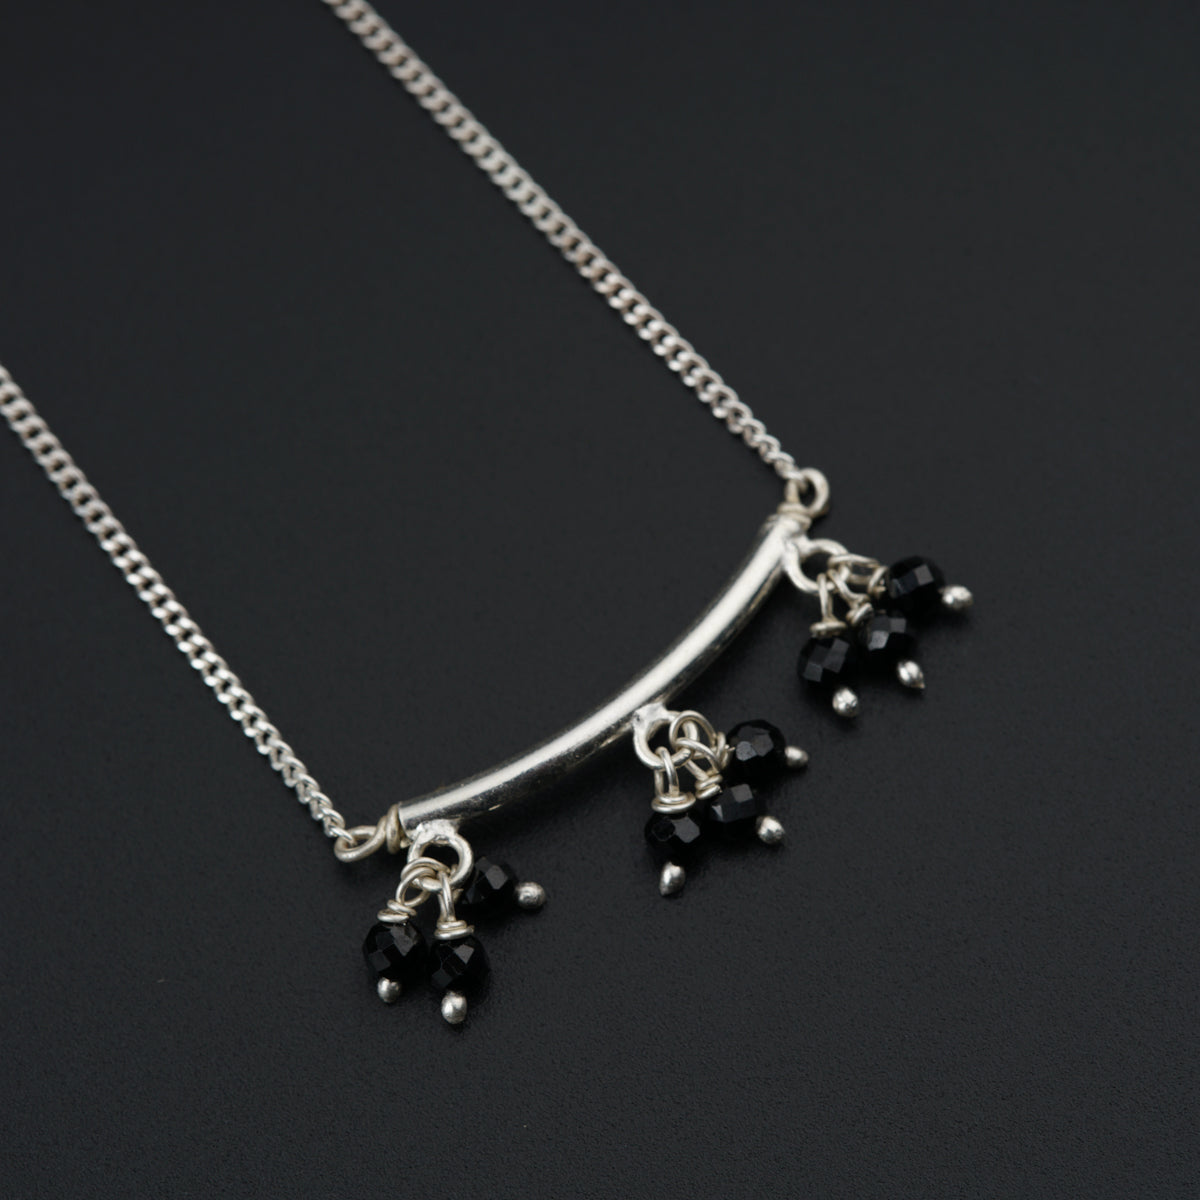 Handmade Silver Mangalsutra with tiny spinel latkans